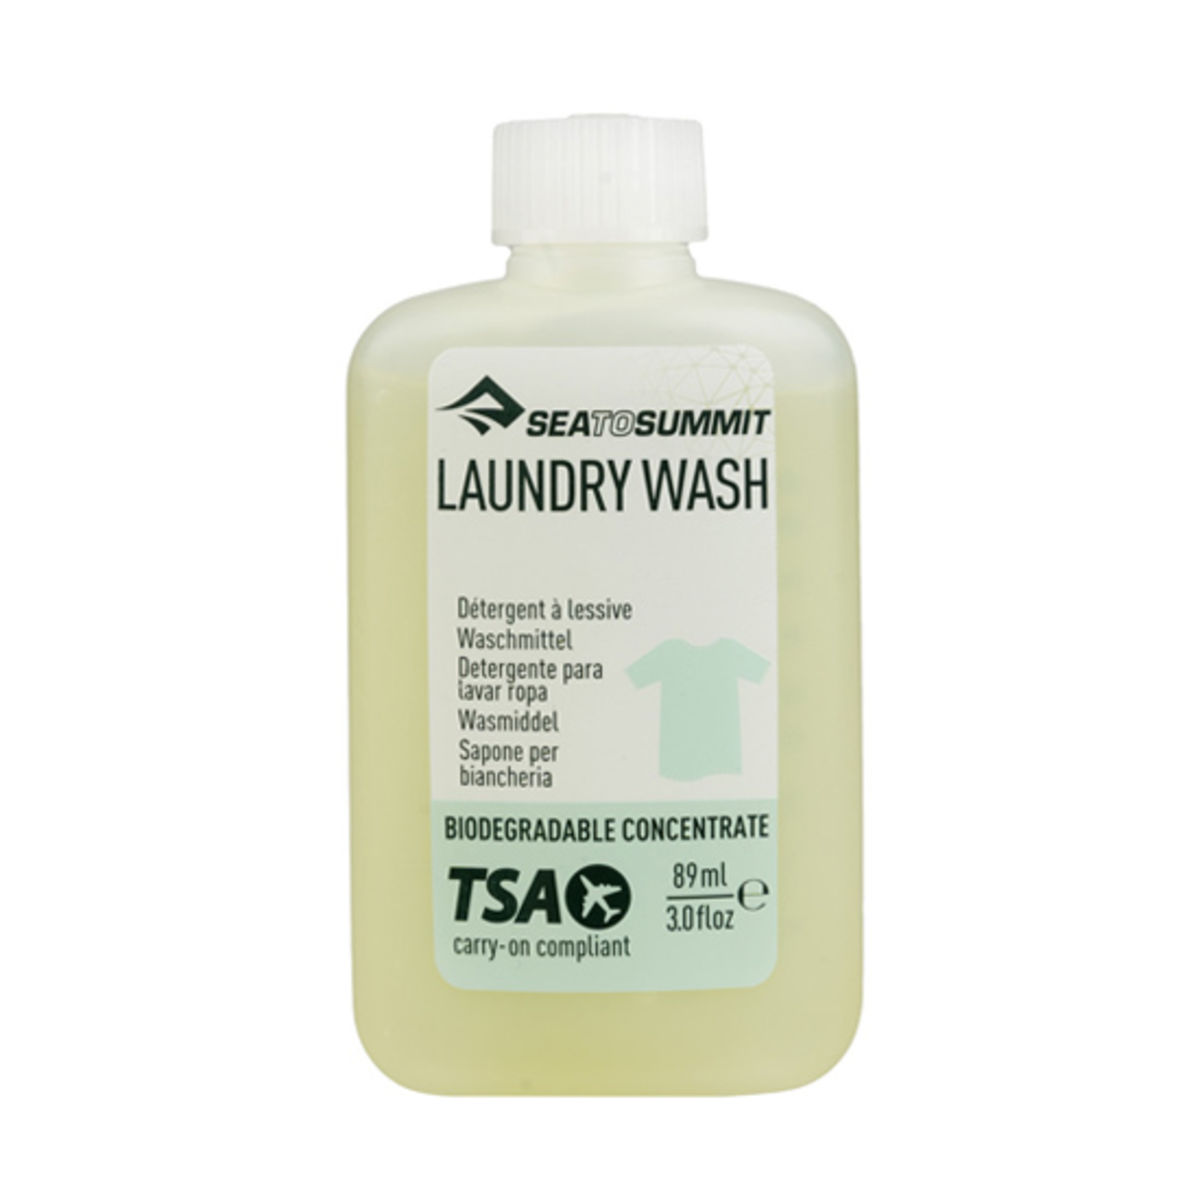 Sea to Summit biodegradable concentrate laundry wash